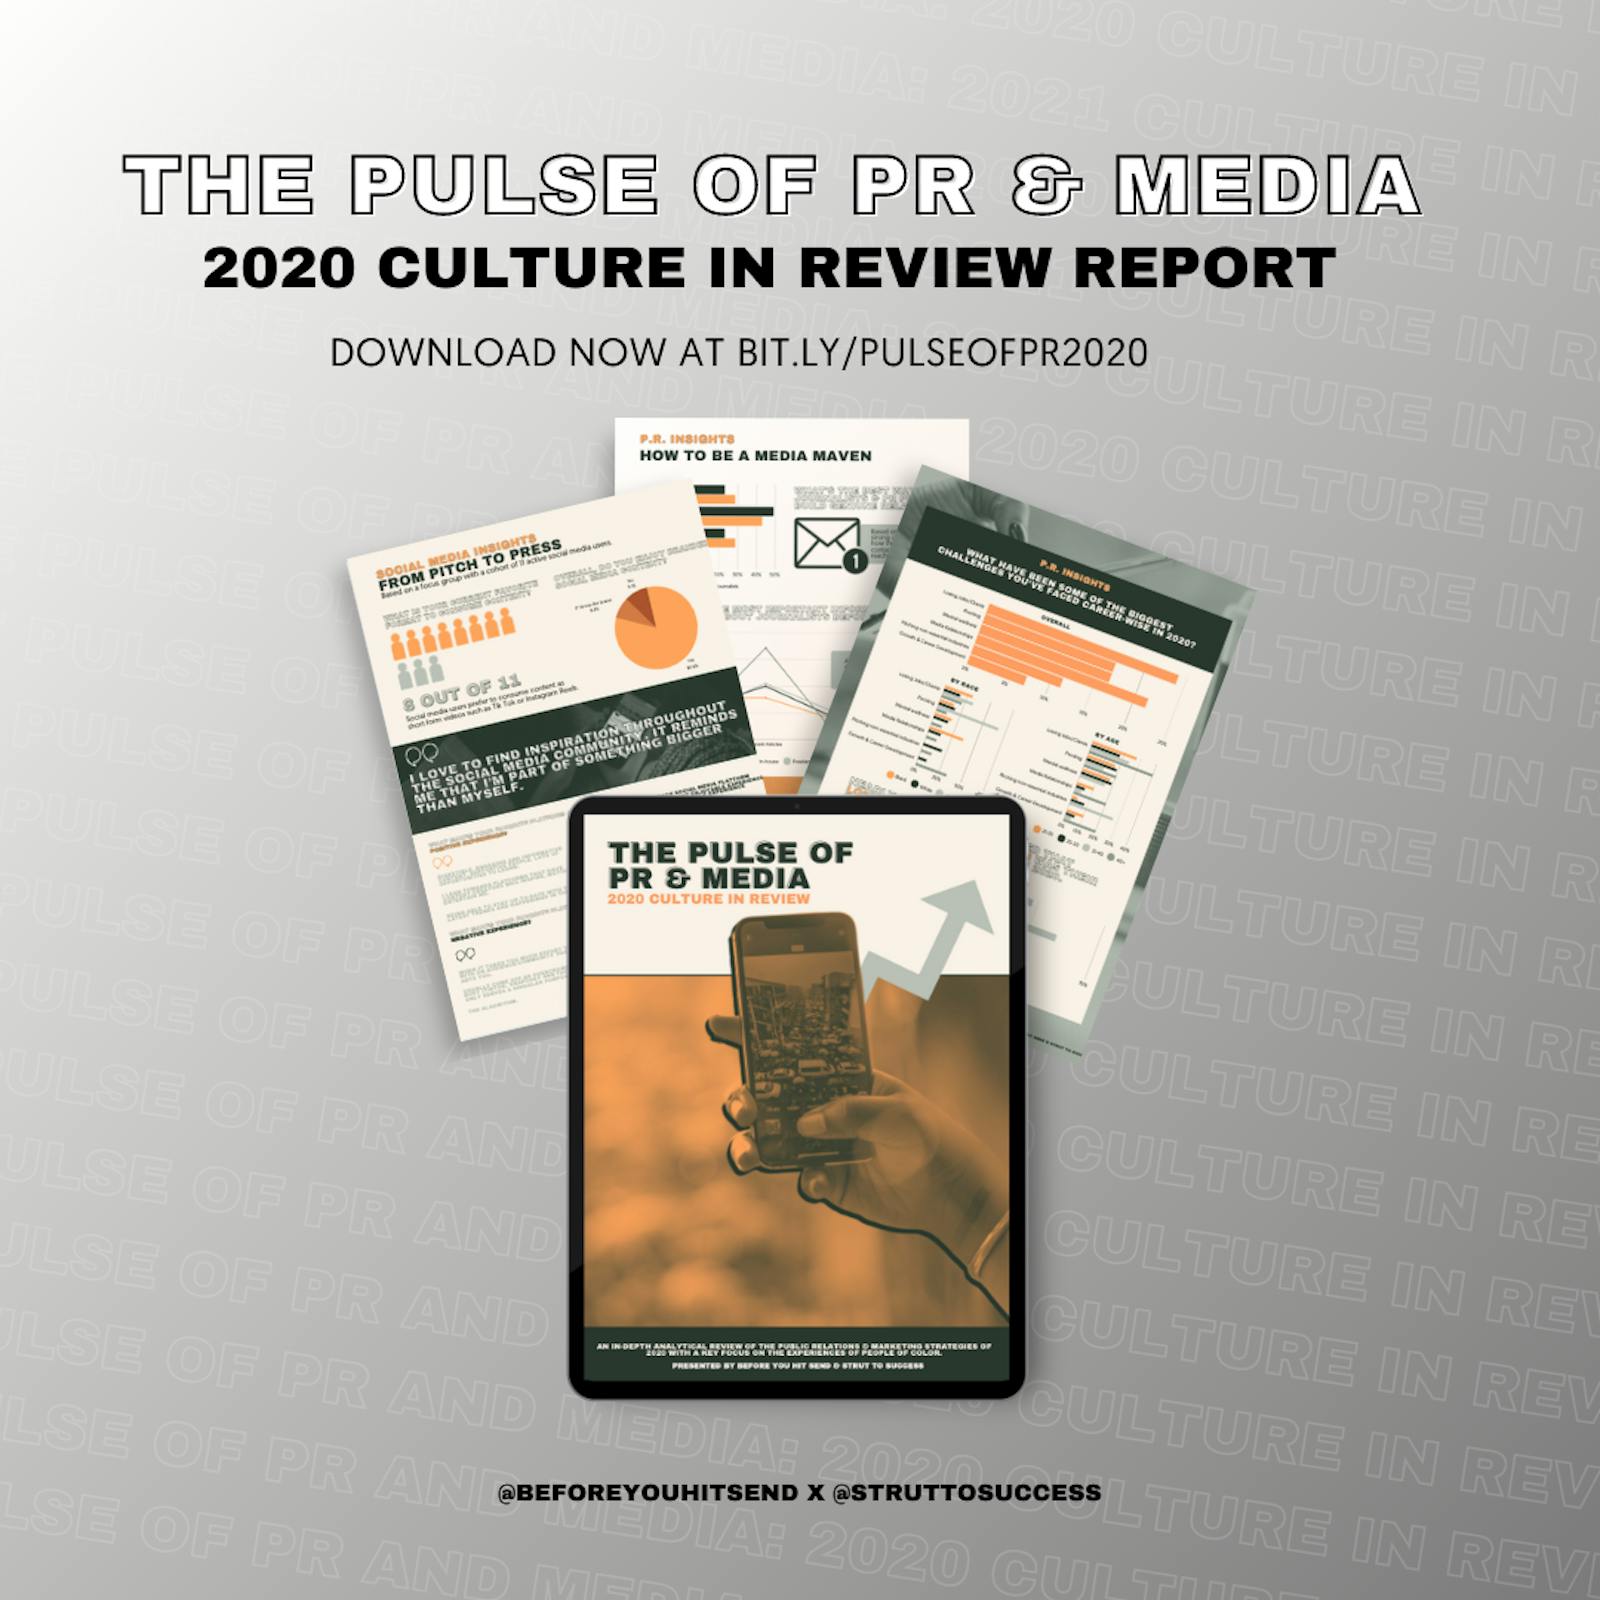 The Pulse of PR & Media: 2020 Culture in Review 